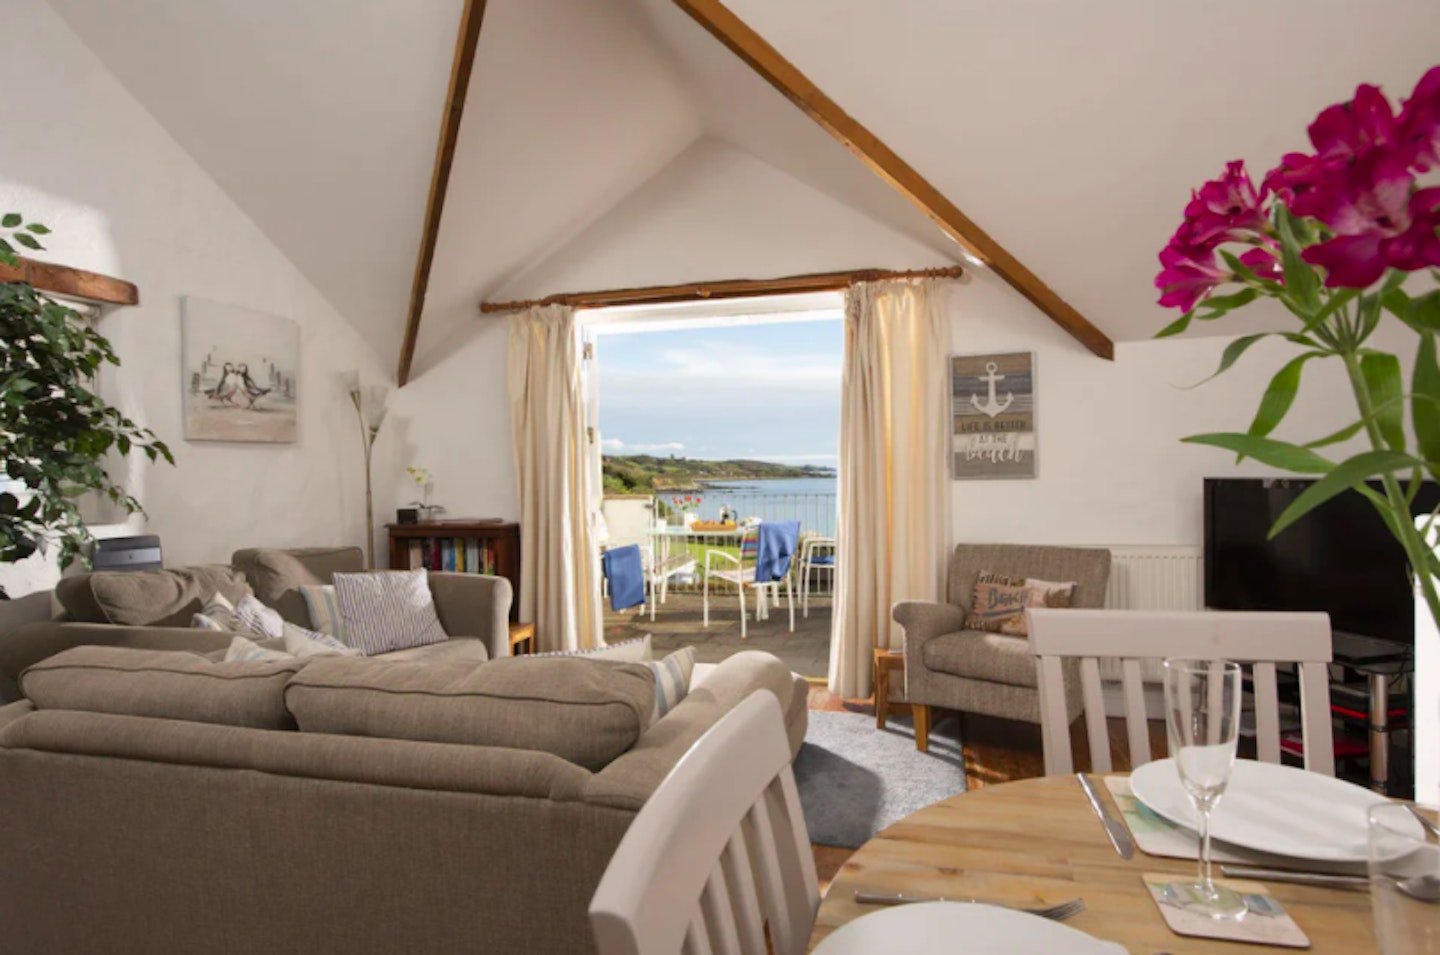 Best Holiday Cottages on Plum Guide - Grazia